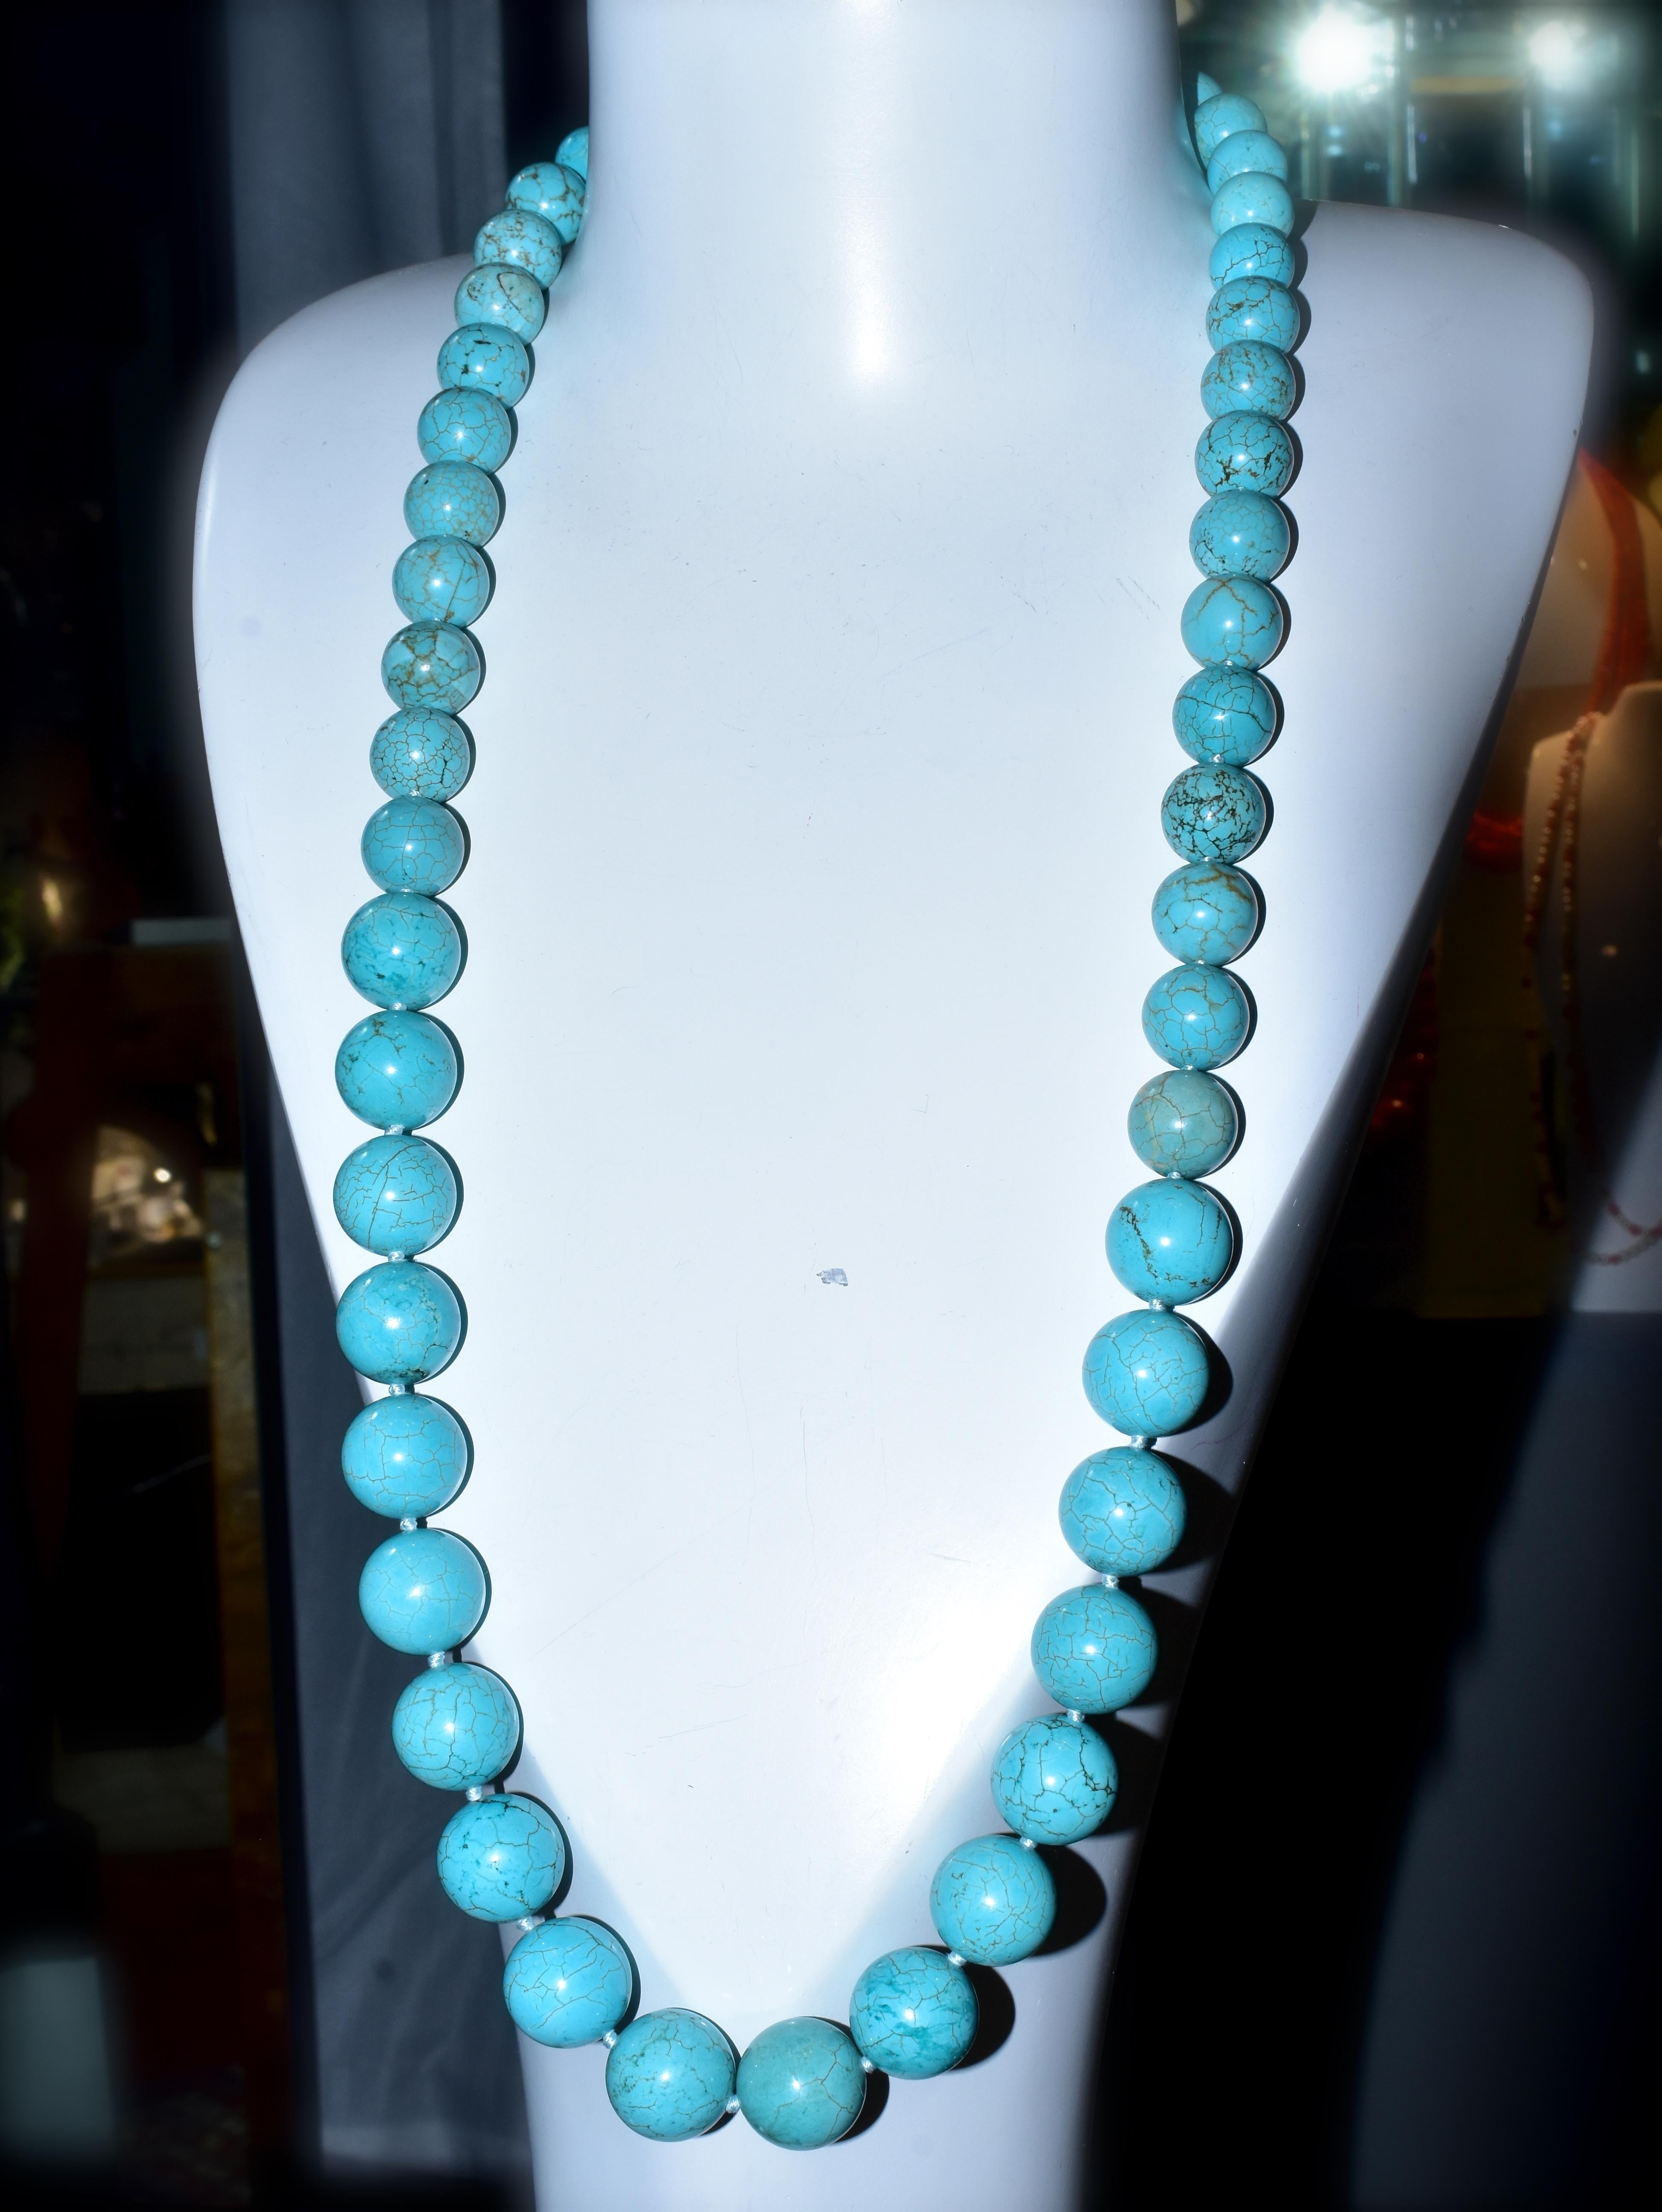 Tibetan natural turquoise, 50 round beads displaying a pleasing medium blue, robin's egg blue, with natural spider like webbing.  This 35 inch strand was recently restrung, a well made 12 mm. gold clasp finished the necklace.  The natural turquoise